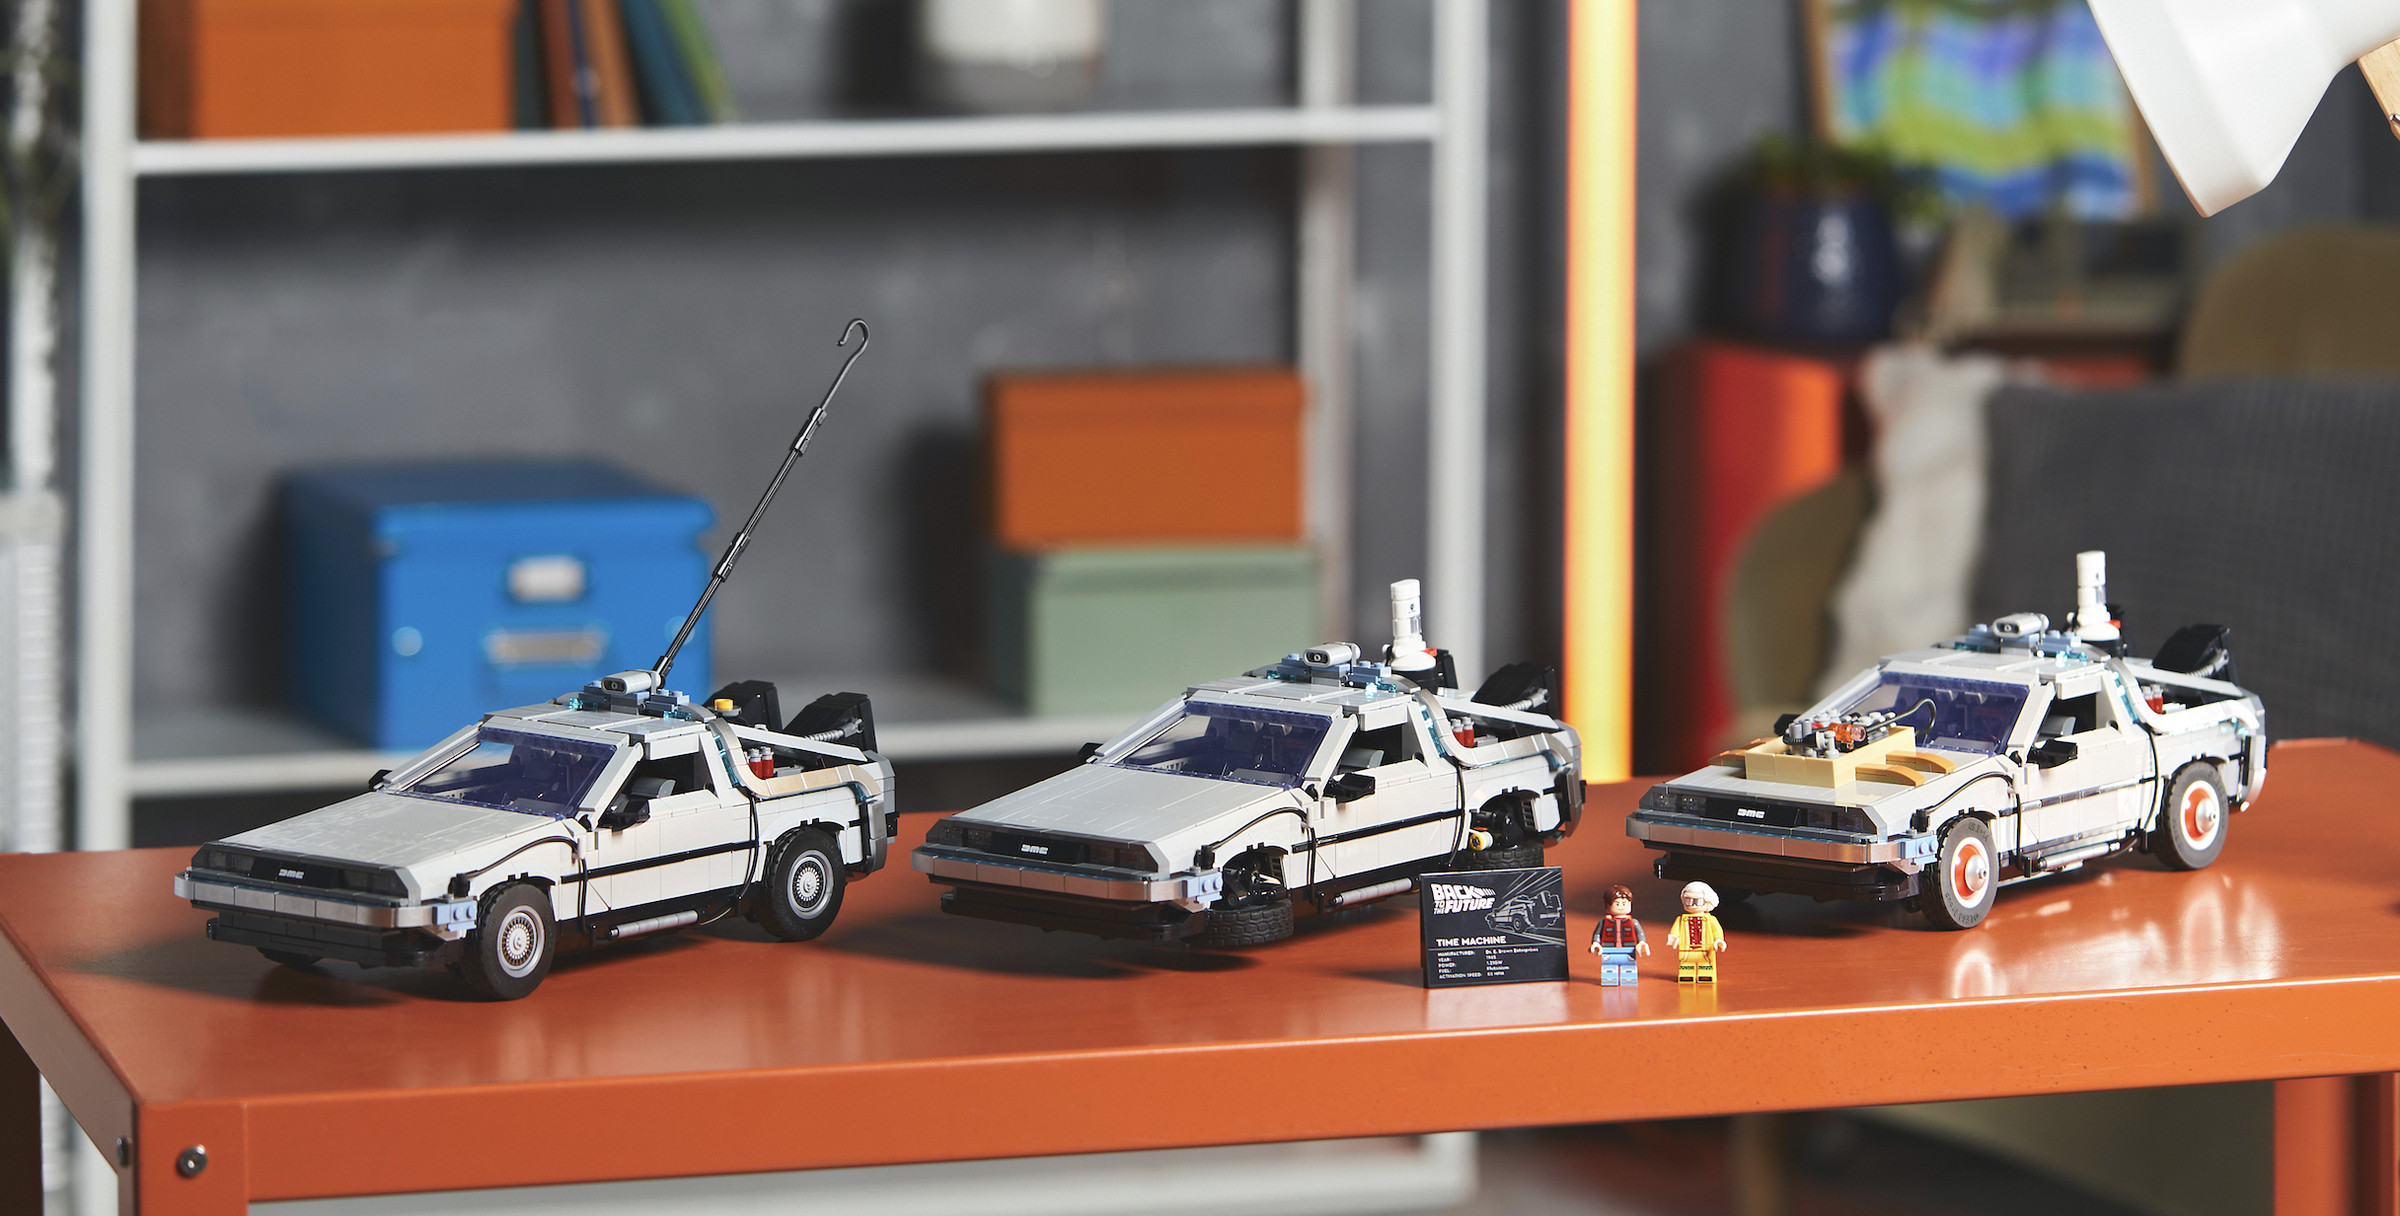 The DeLorean set can be built in Back to the Future, Back to the Future Part II, and Back to the Future Part III versions.